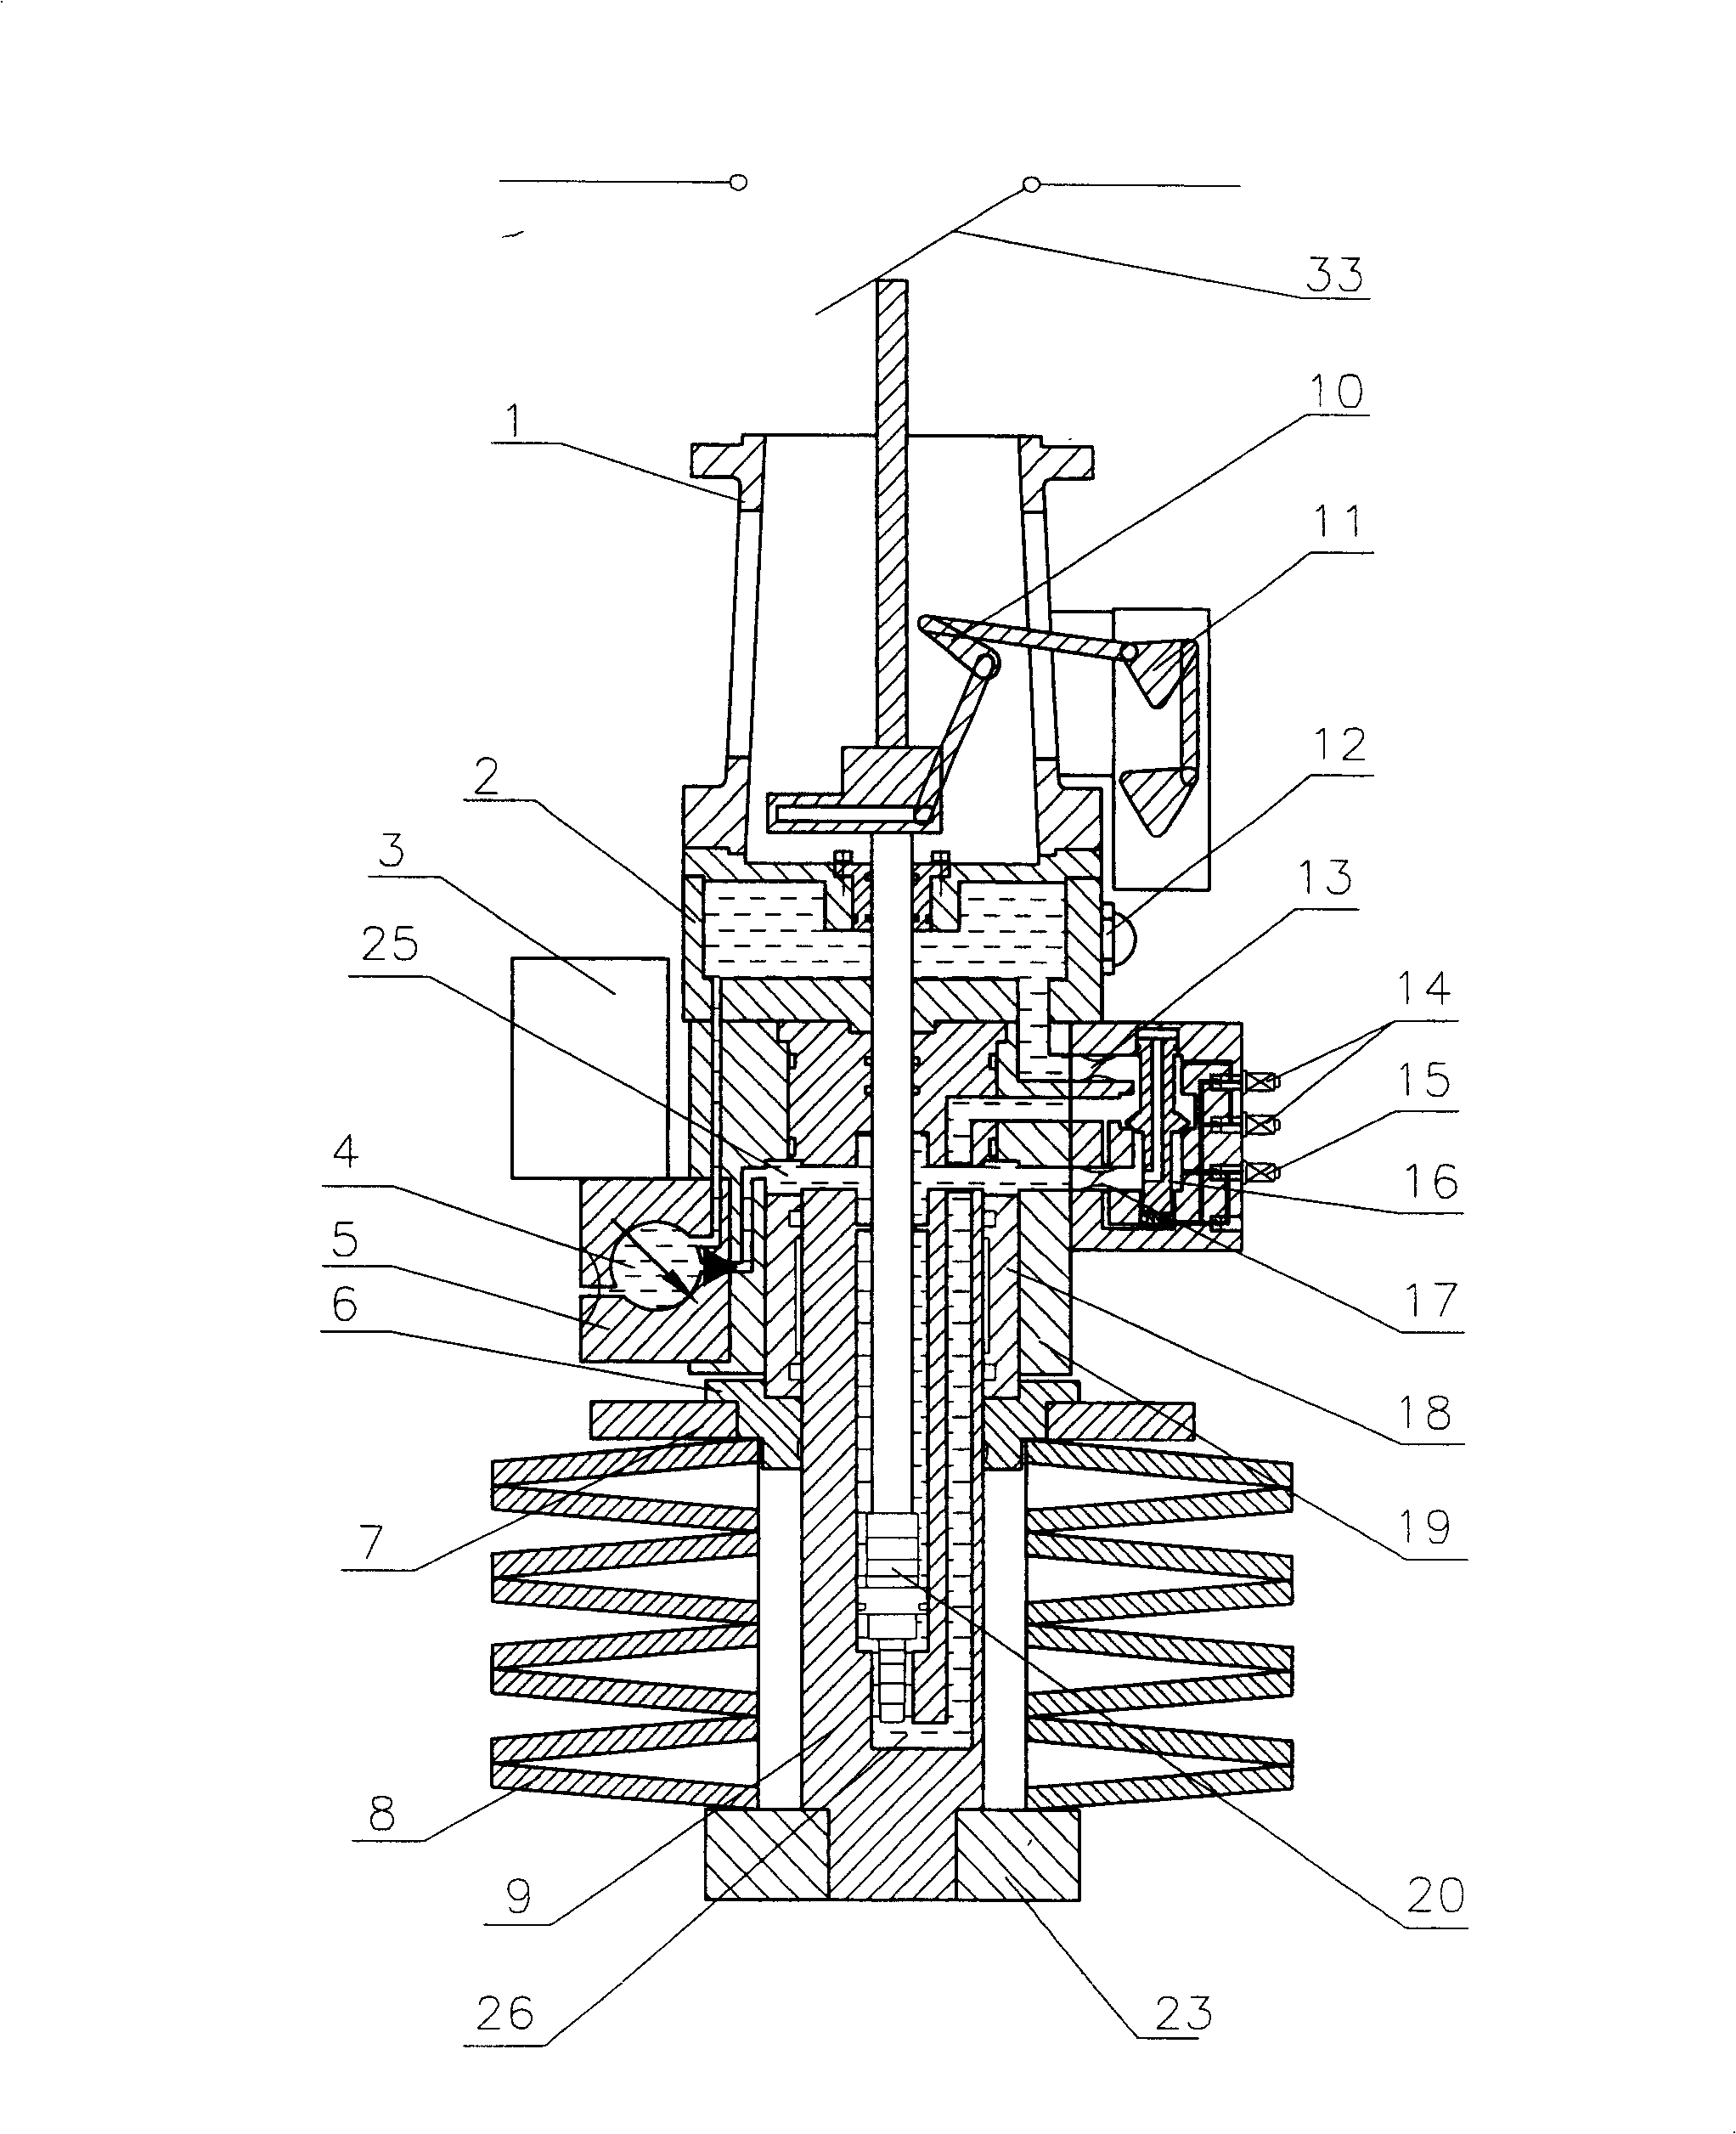 Spring hydraulic operating mechanism for high voltage circuit breaker